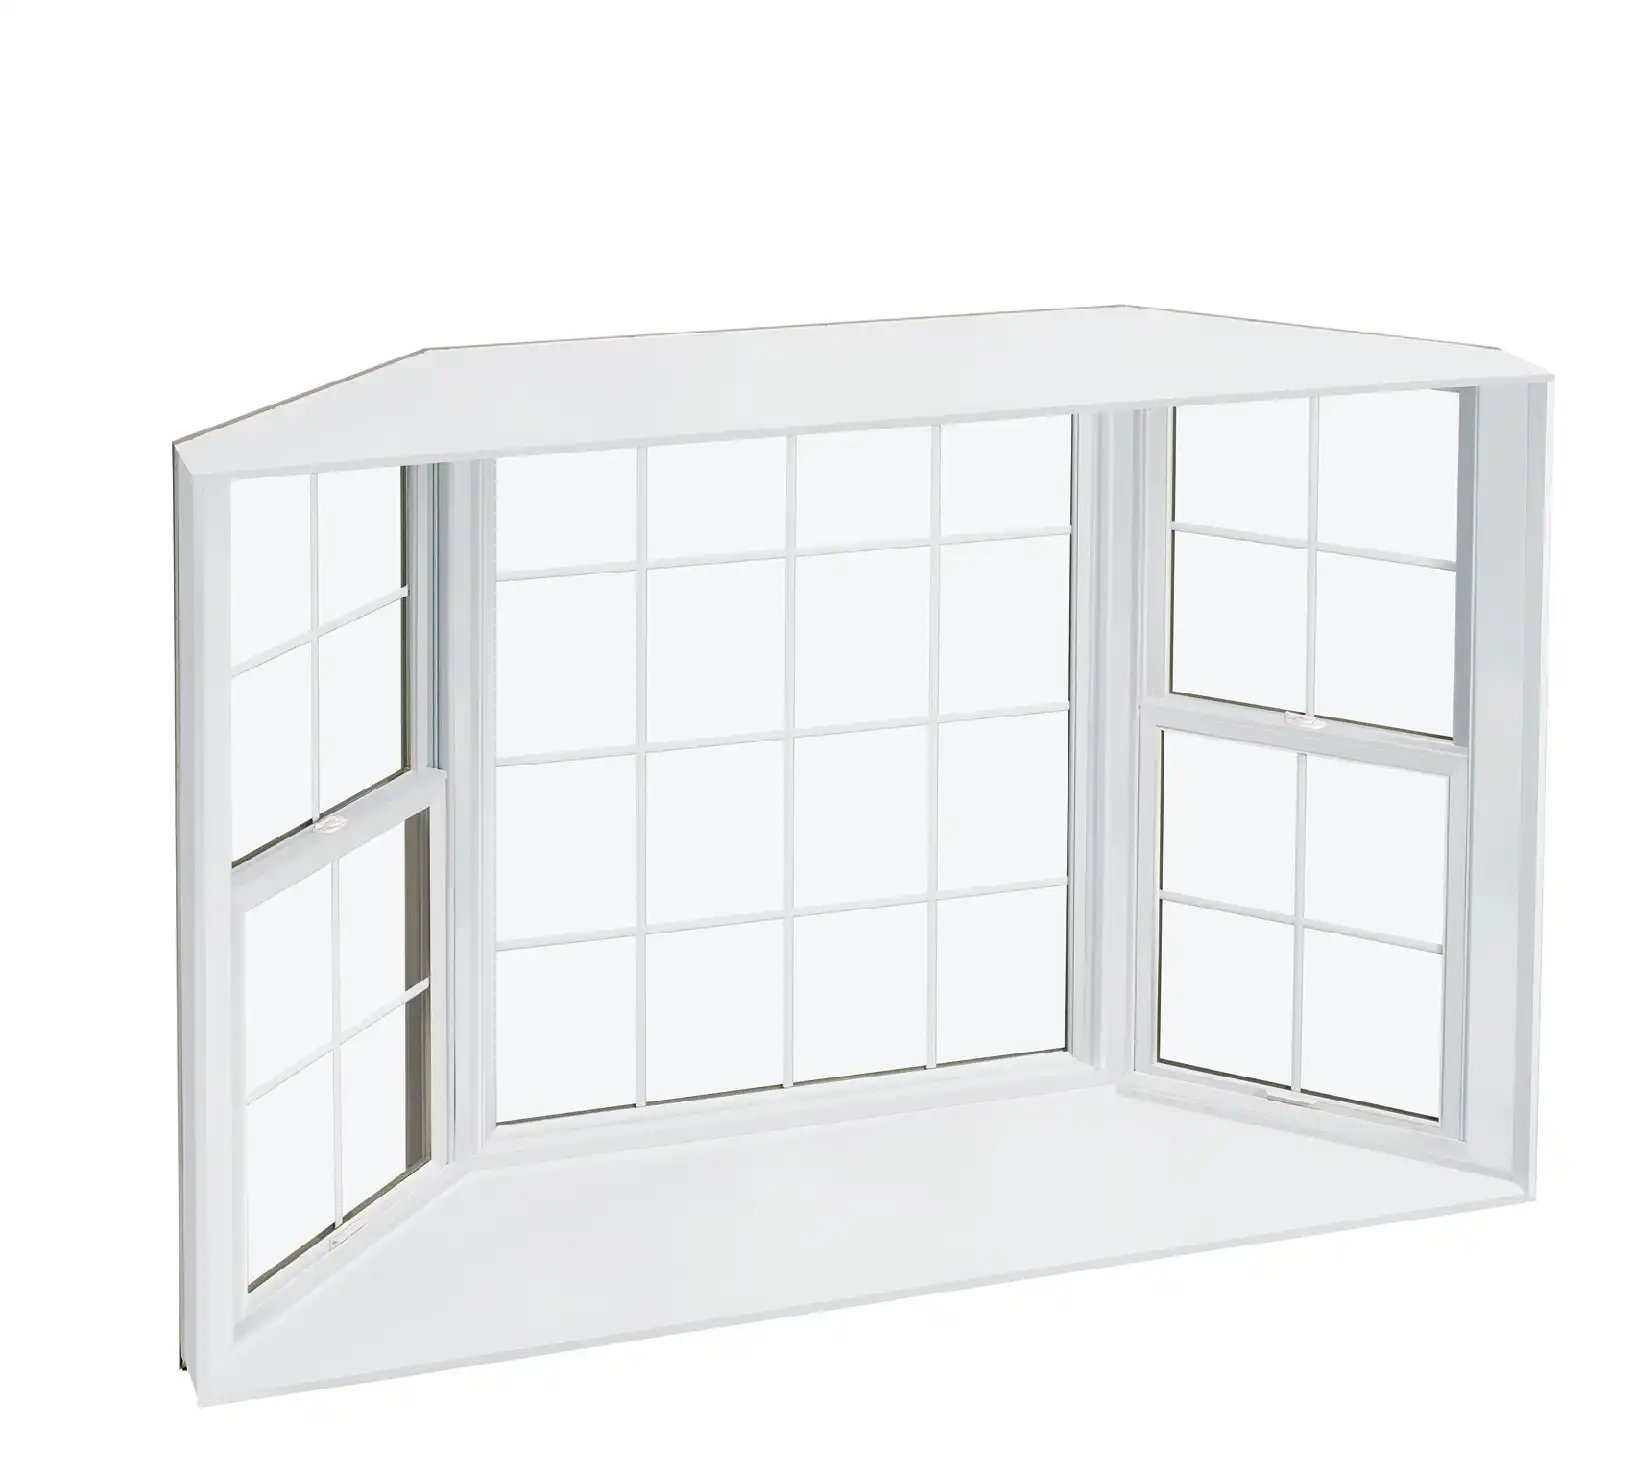 View of a white Marvin Replacement Bay window with flanking Double Hung windows featuring divided lites.